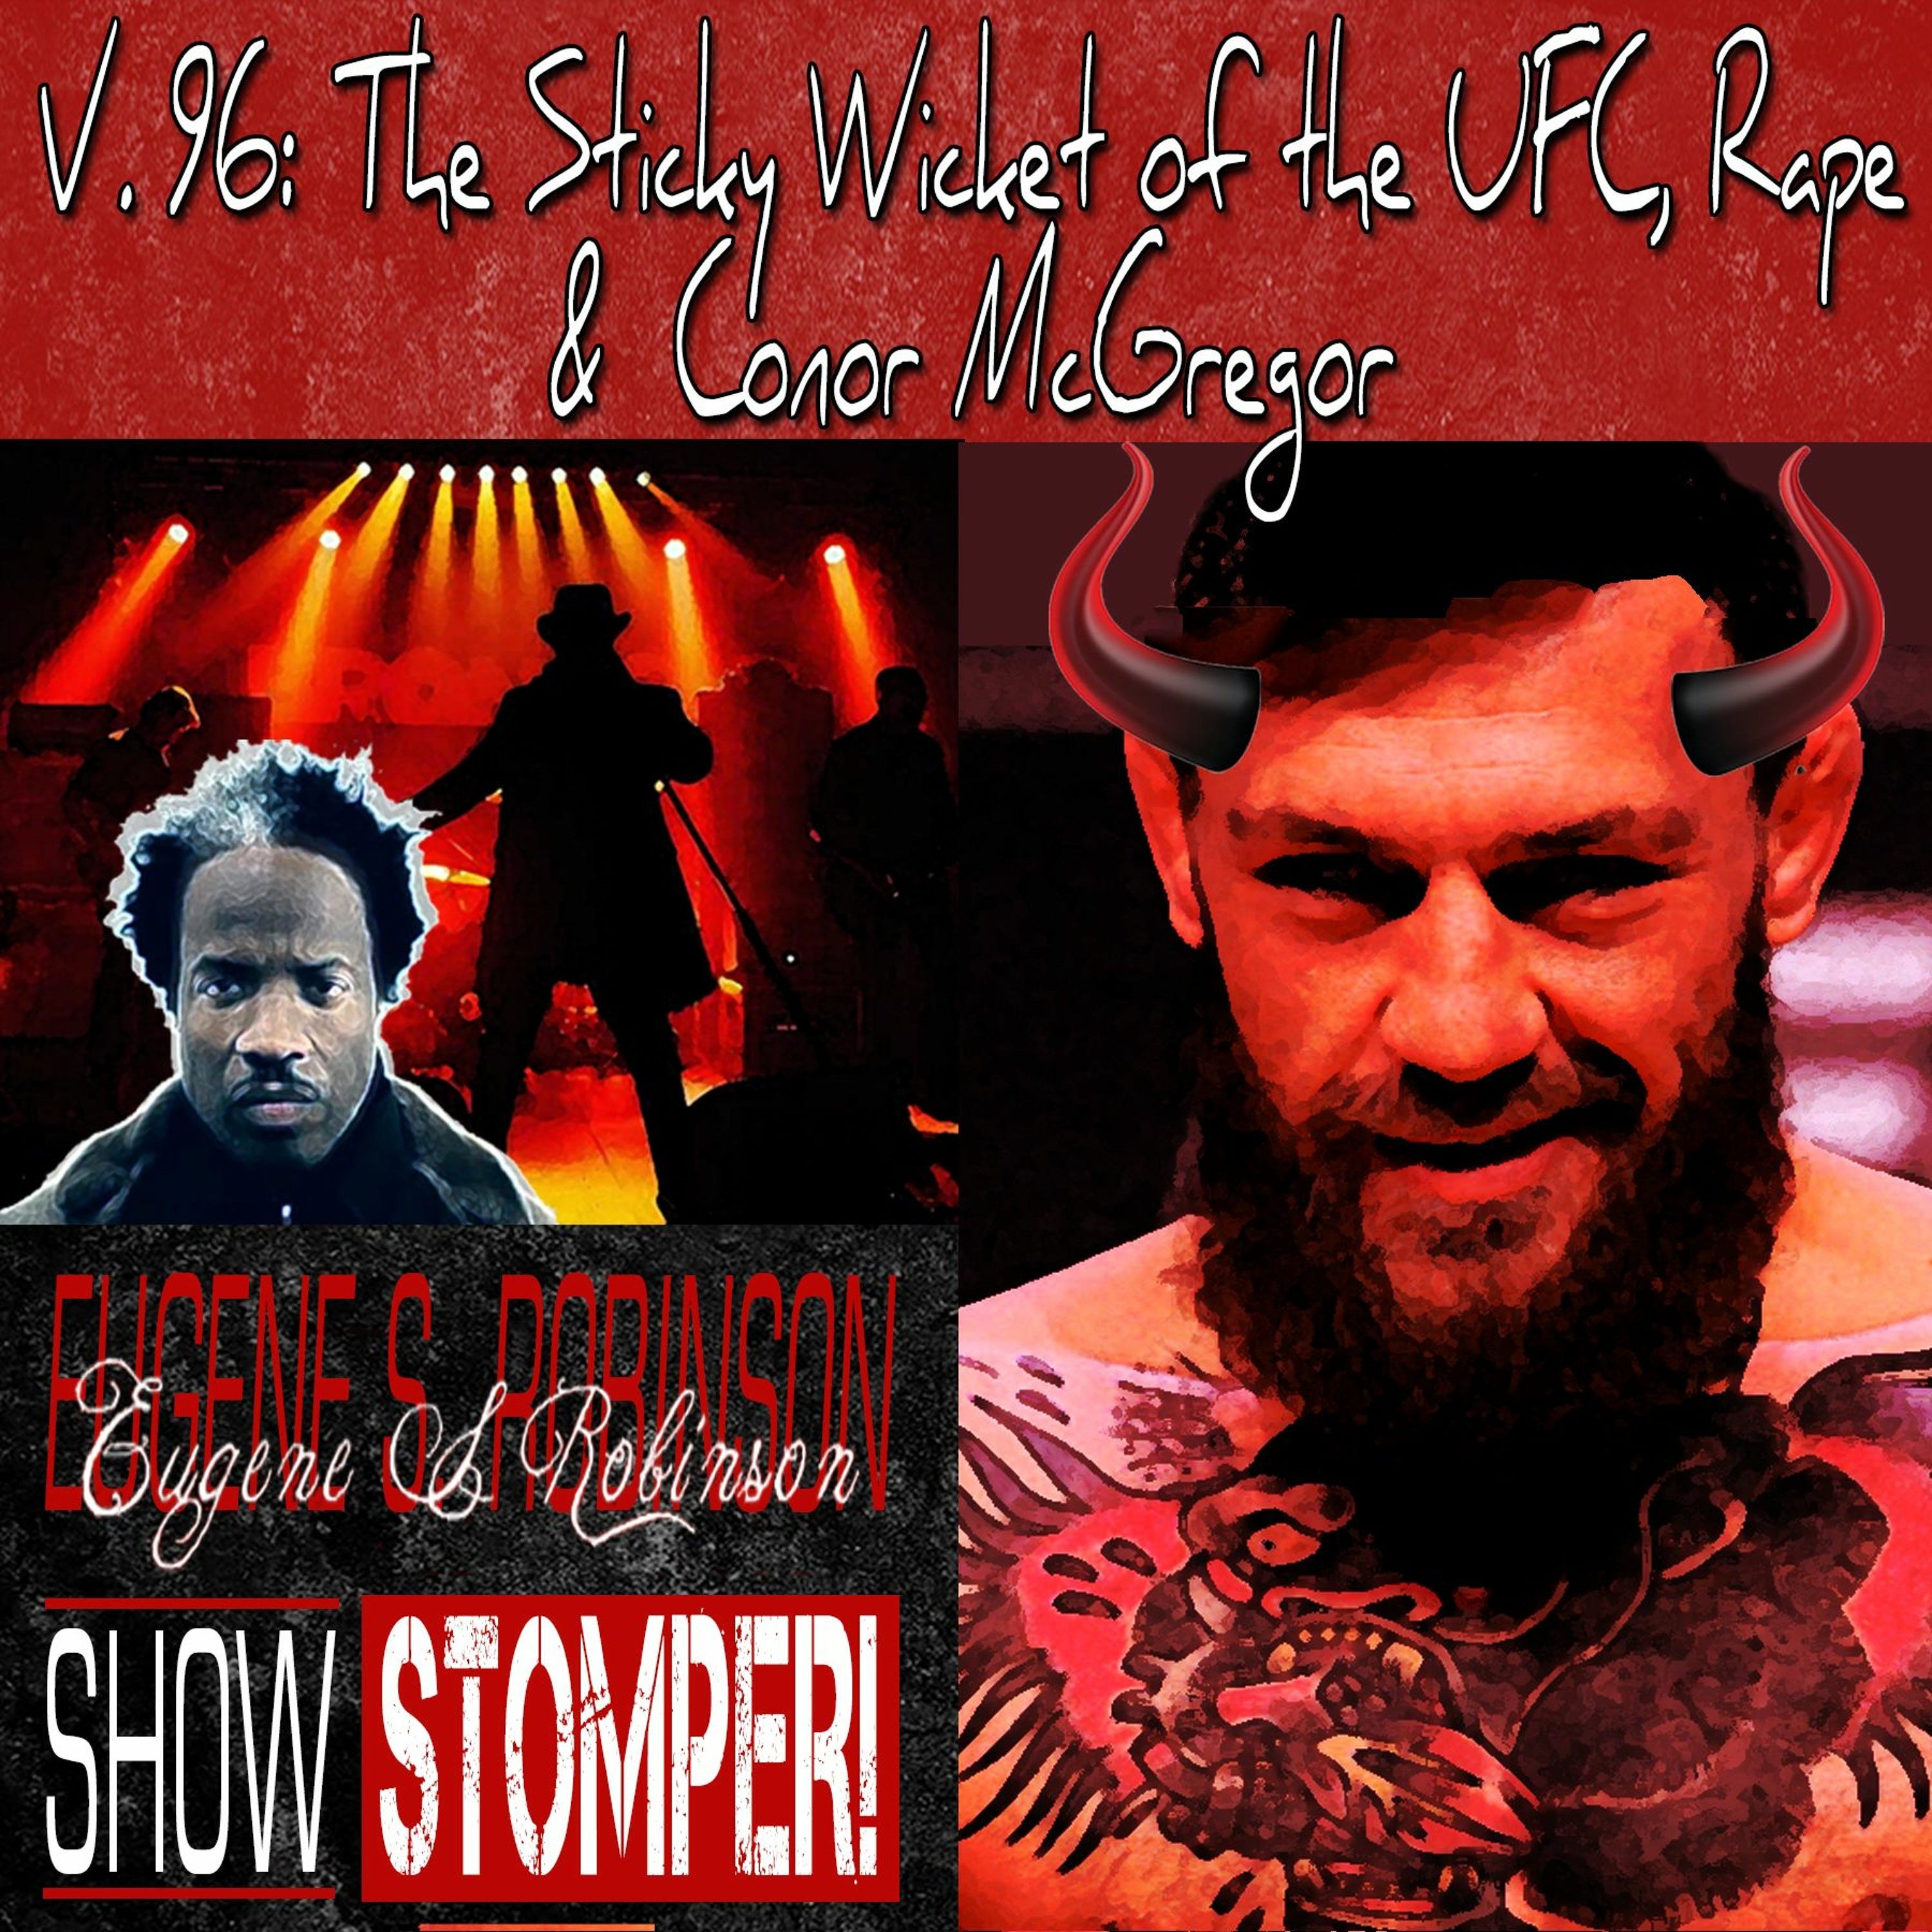 V. 96 The Sticky Wicket Of The UFC, Rape + Conor McGregor On The Eugene S. Robinson Show Stompe